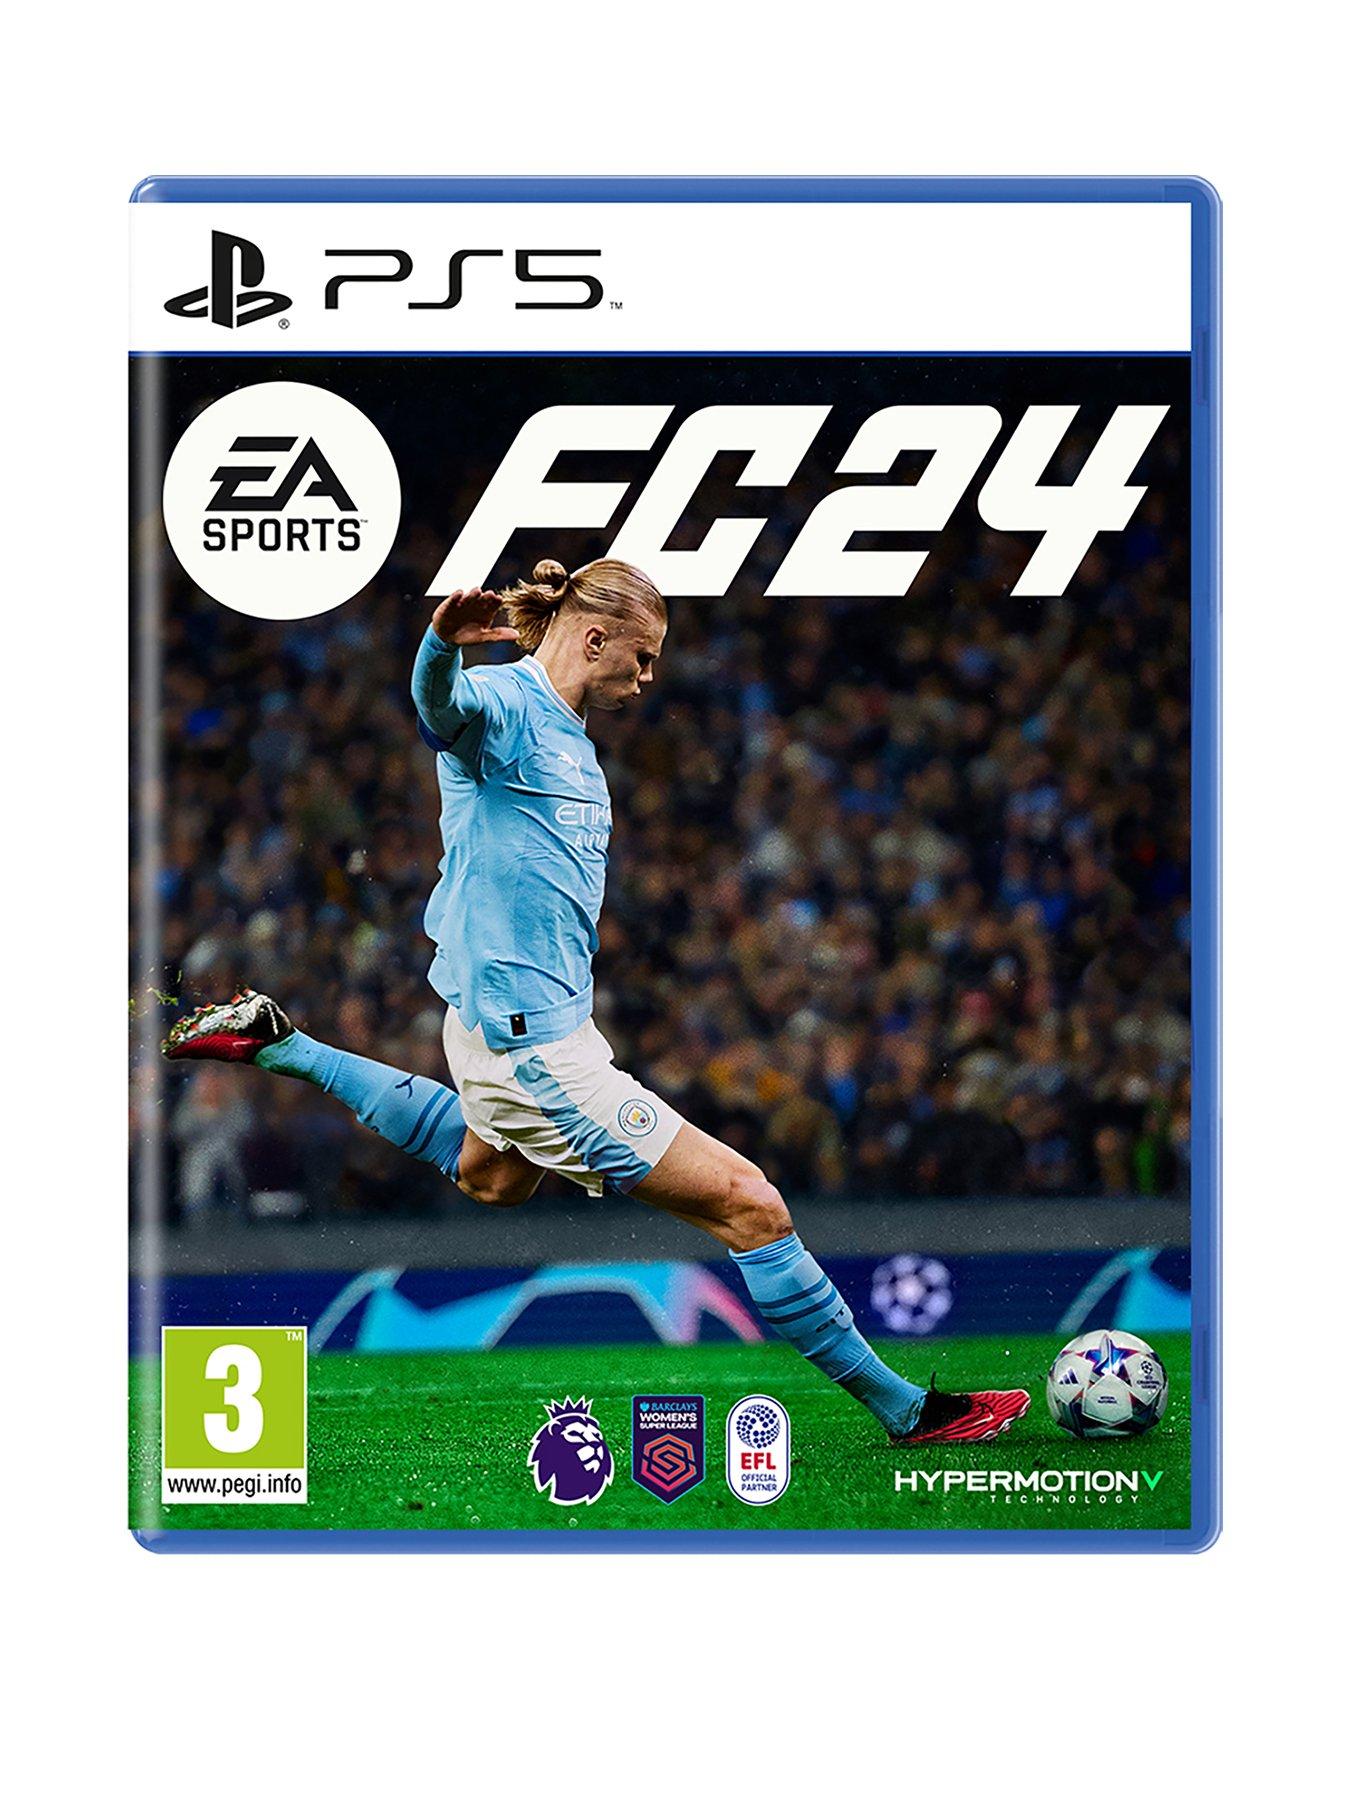 EA FC 24 Mobile – how to download the beta, new features and available  platforms - Mirror Online